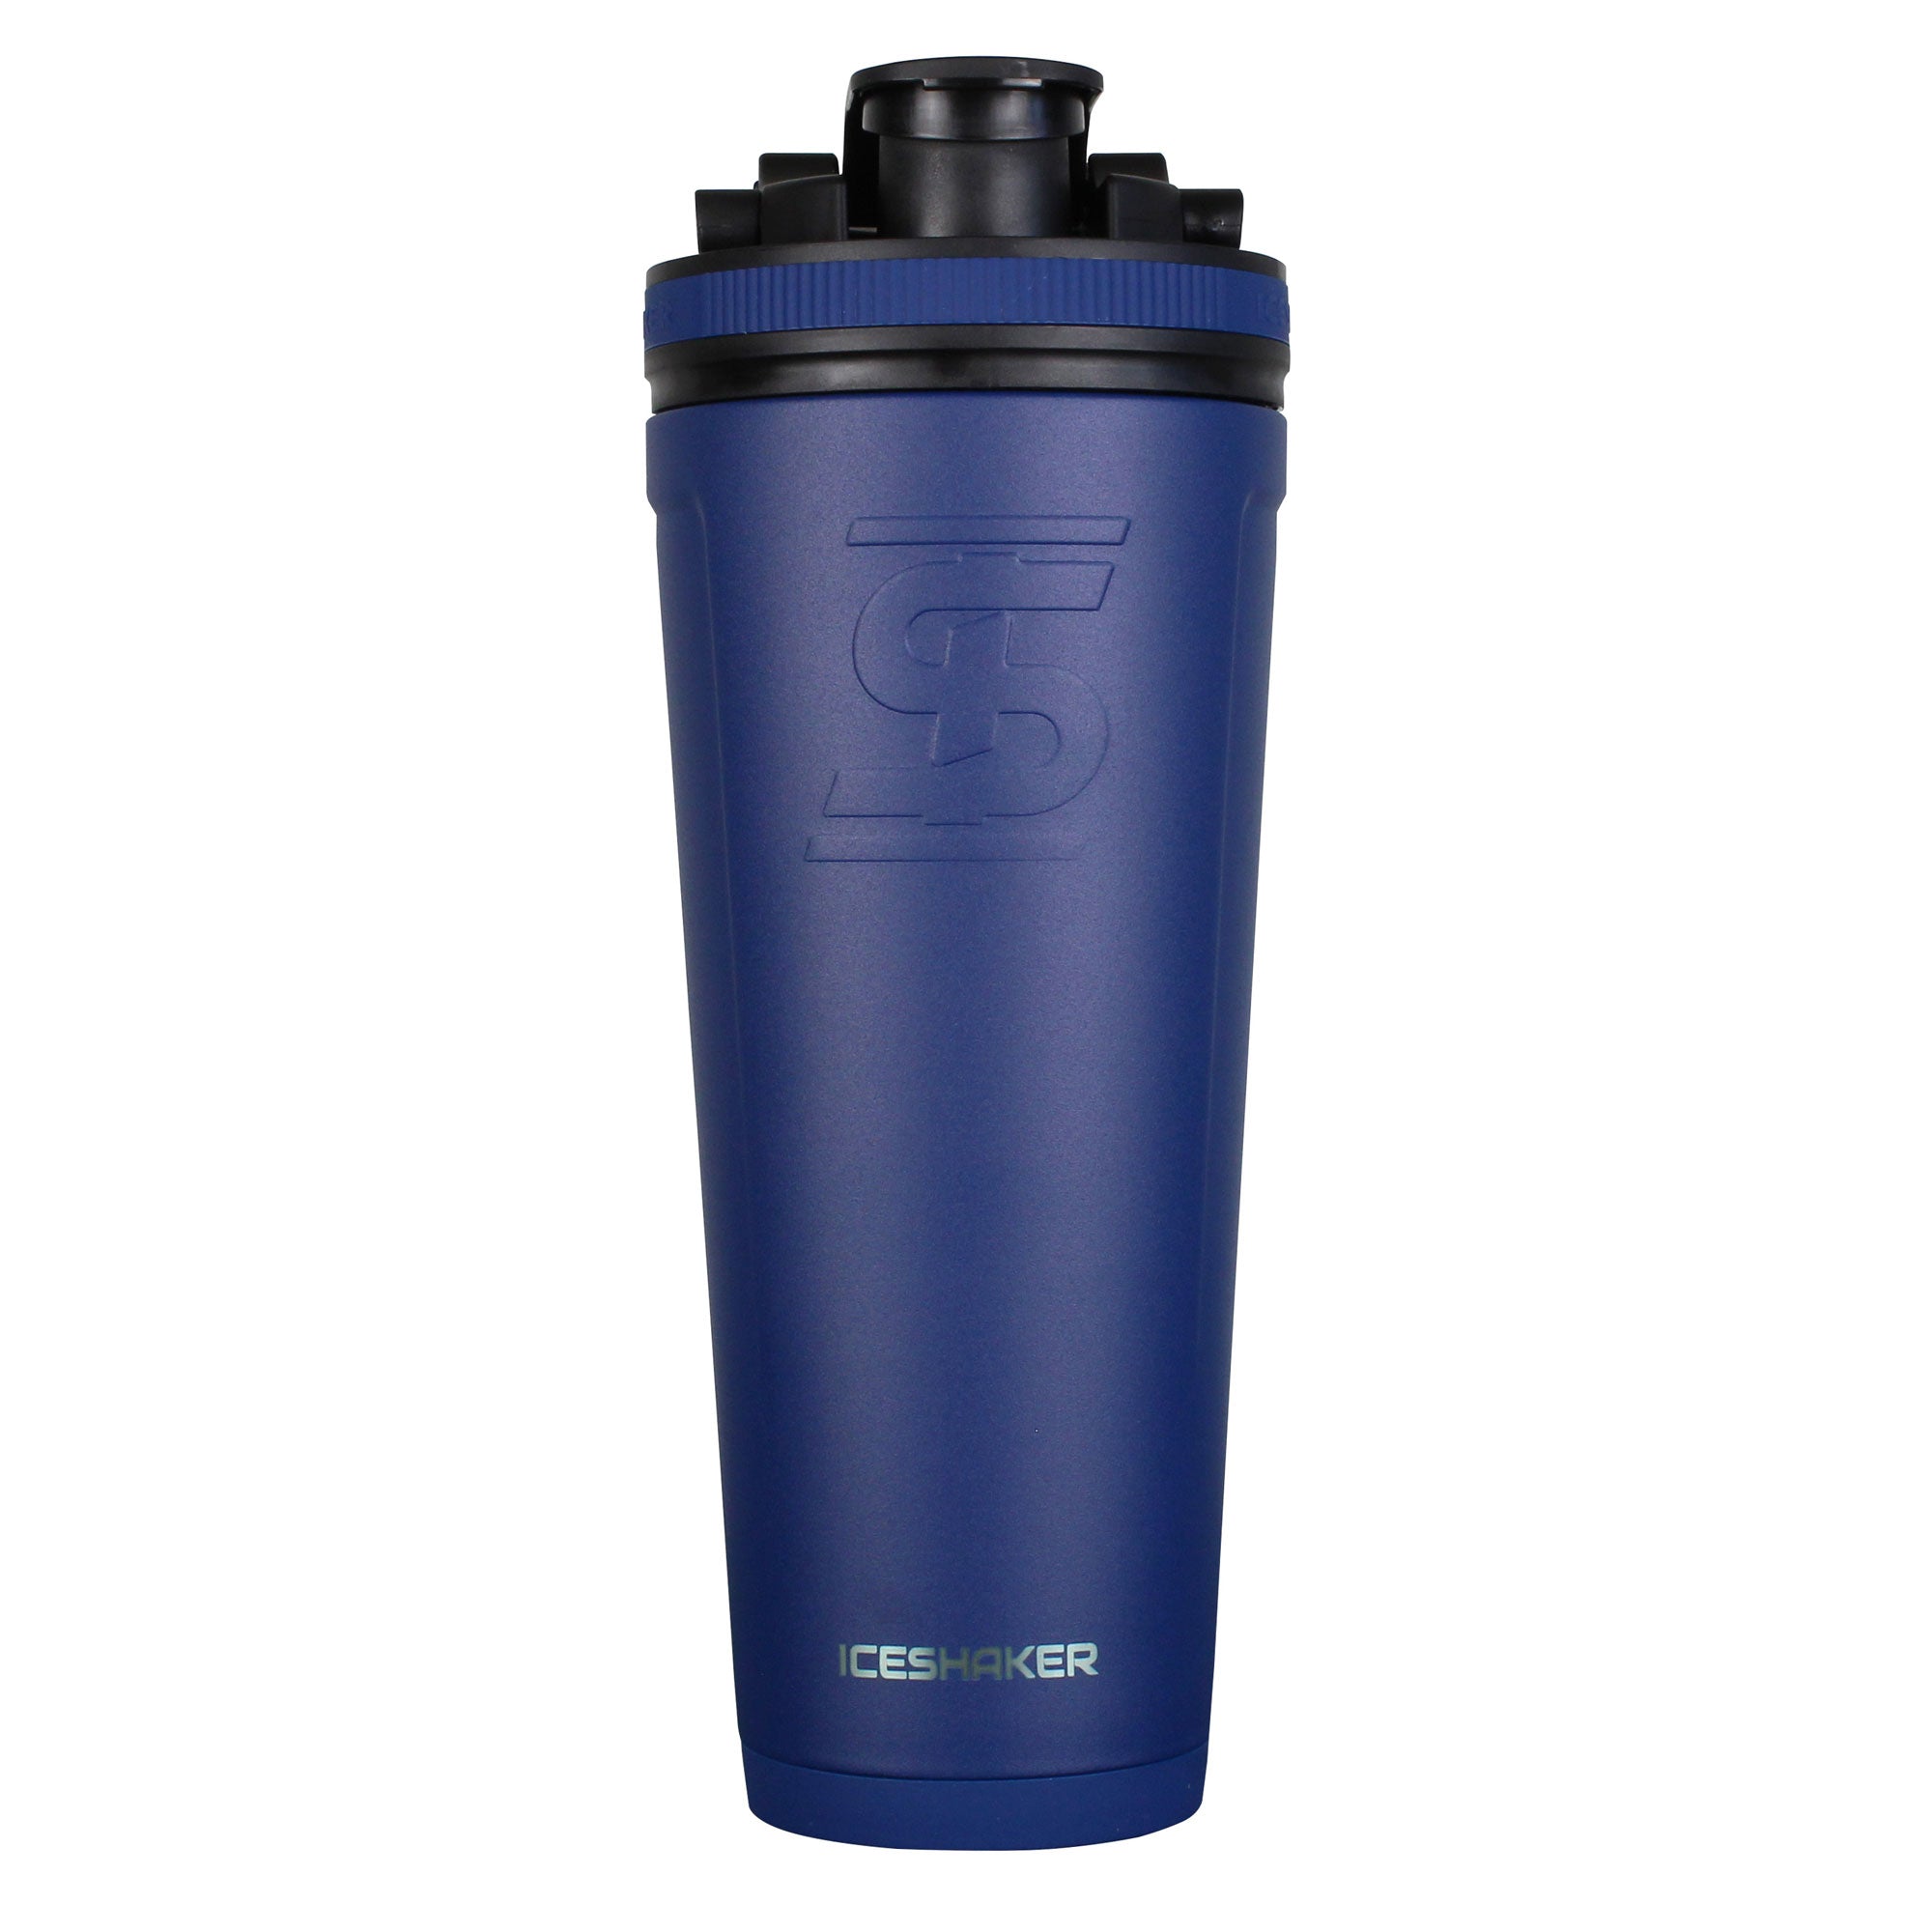 Ice Shaker Double Walled Vacuum Insulated, Skinny Protein Shaker Bottle, Purple & Teal, 20 oz., Size: 20 fl oz